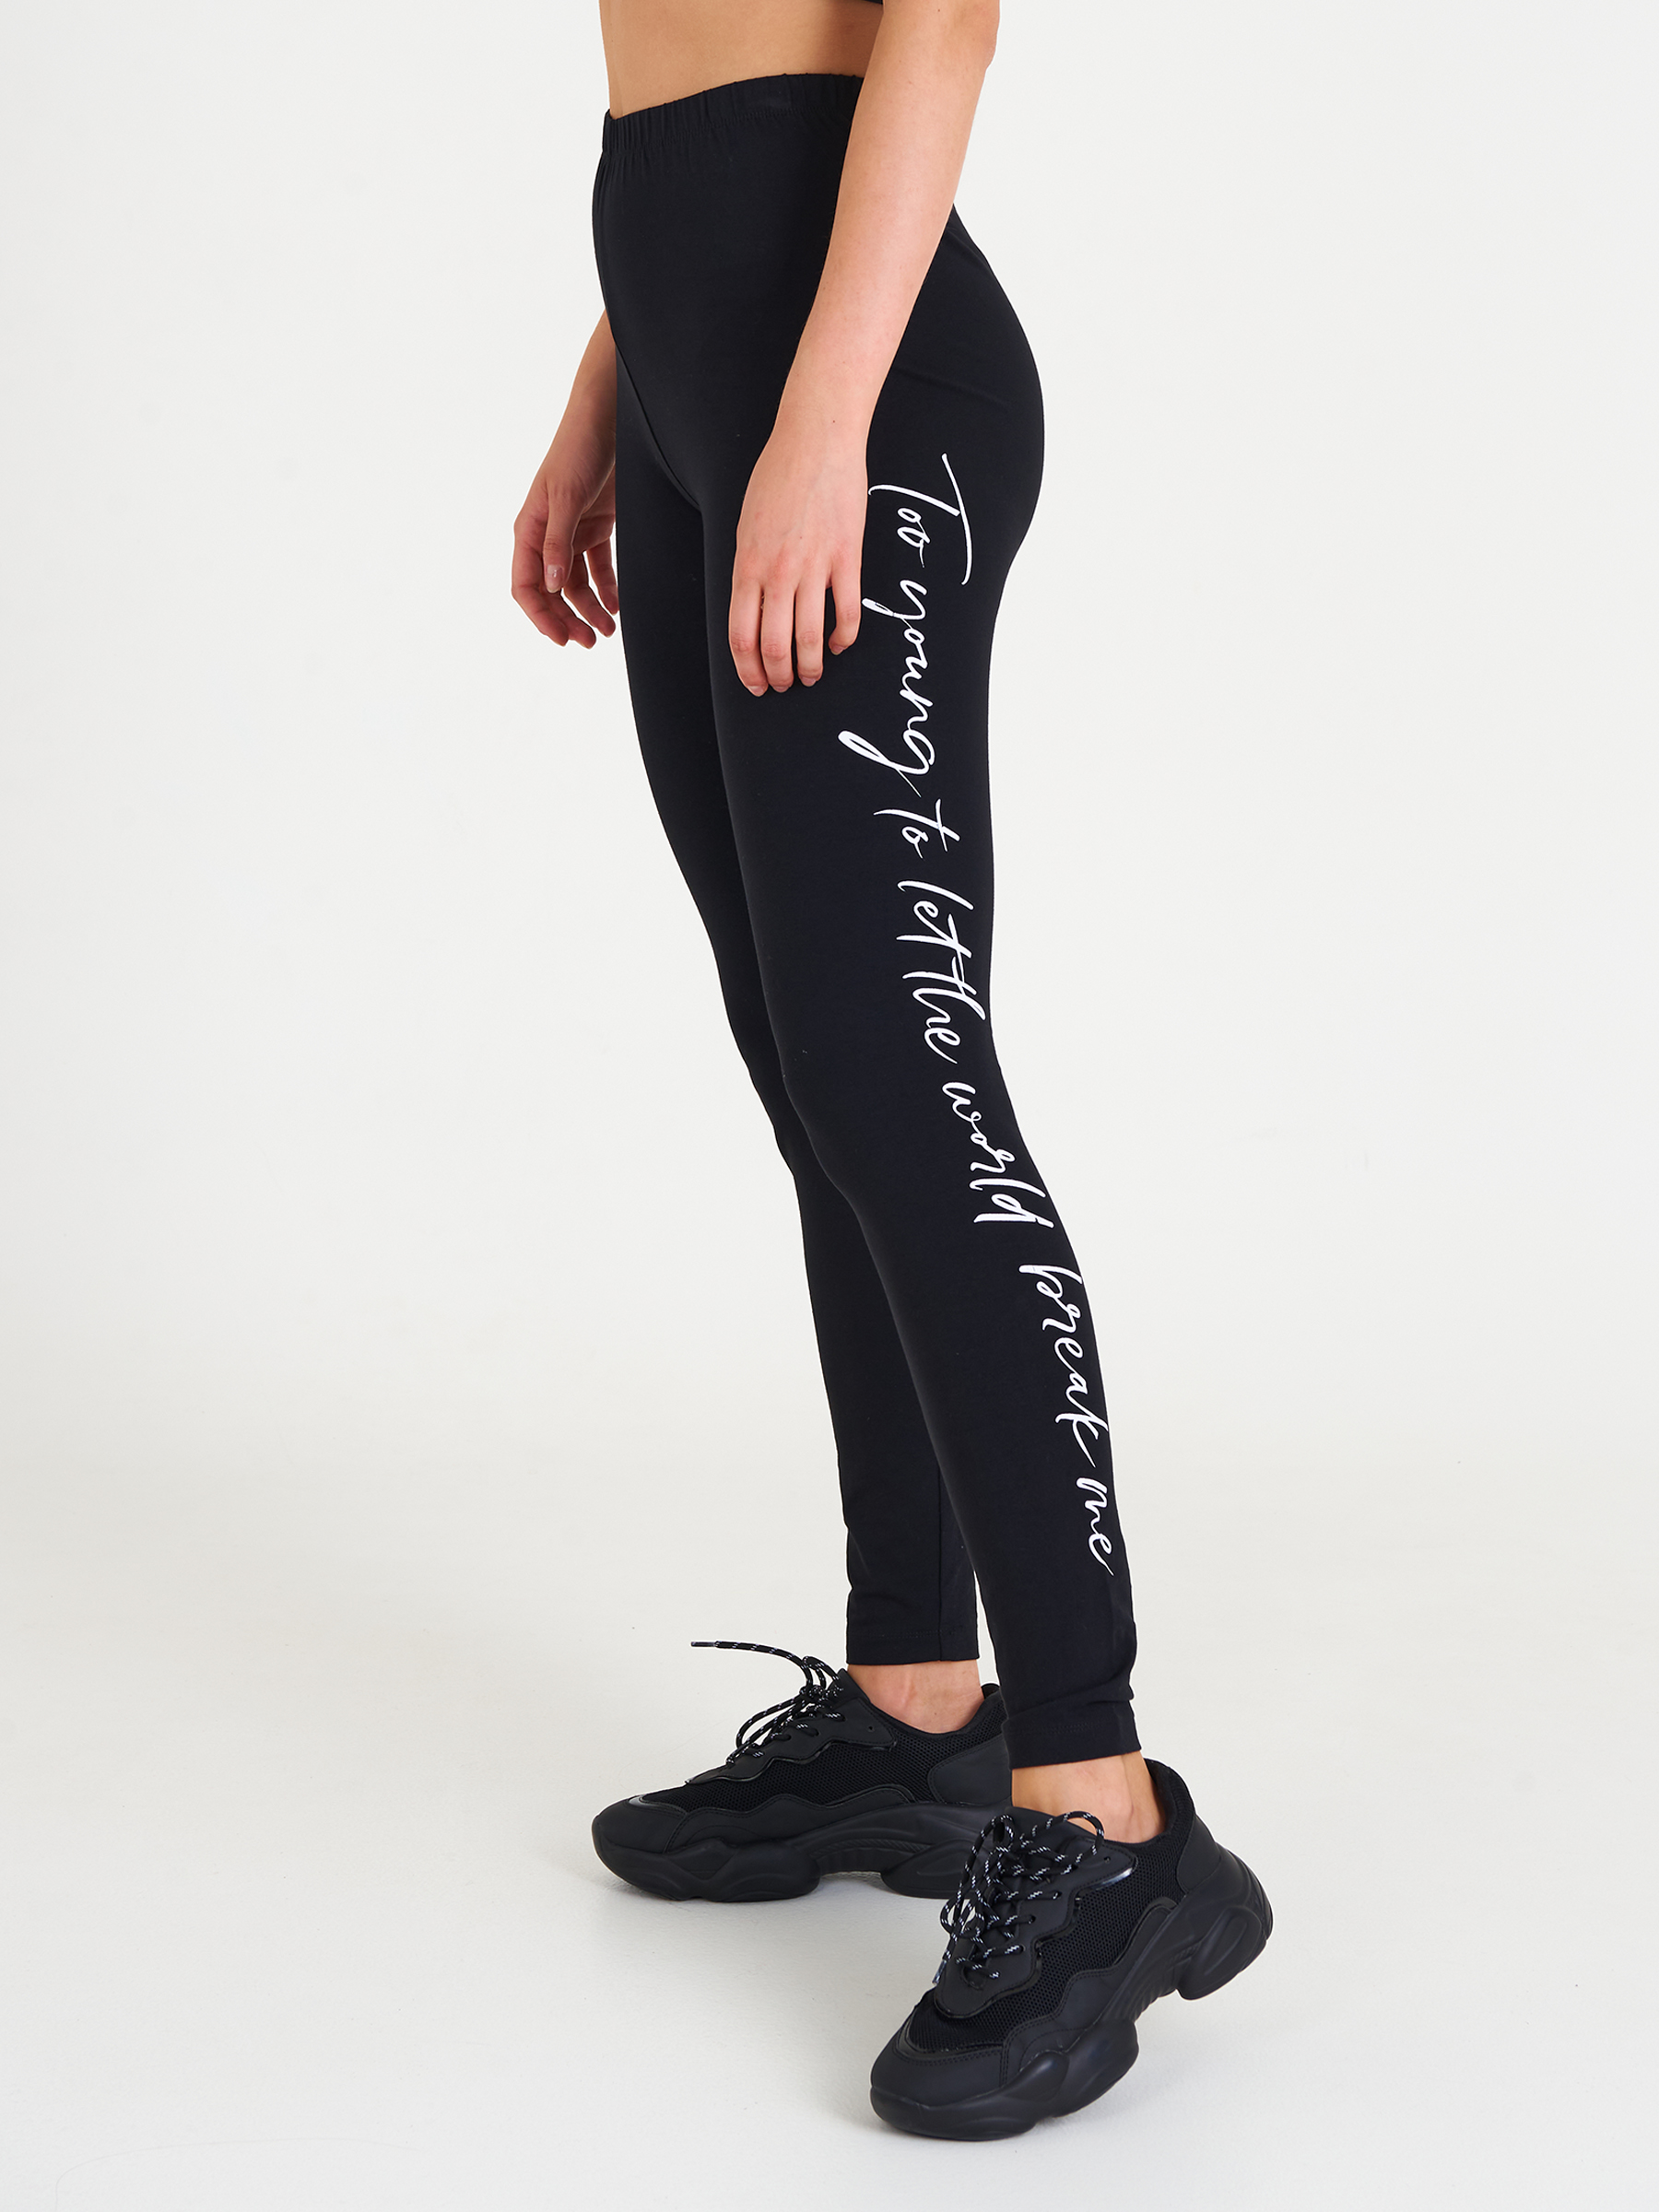 Cotton leggings with printed waistband